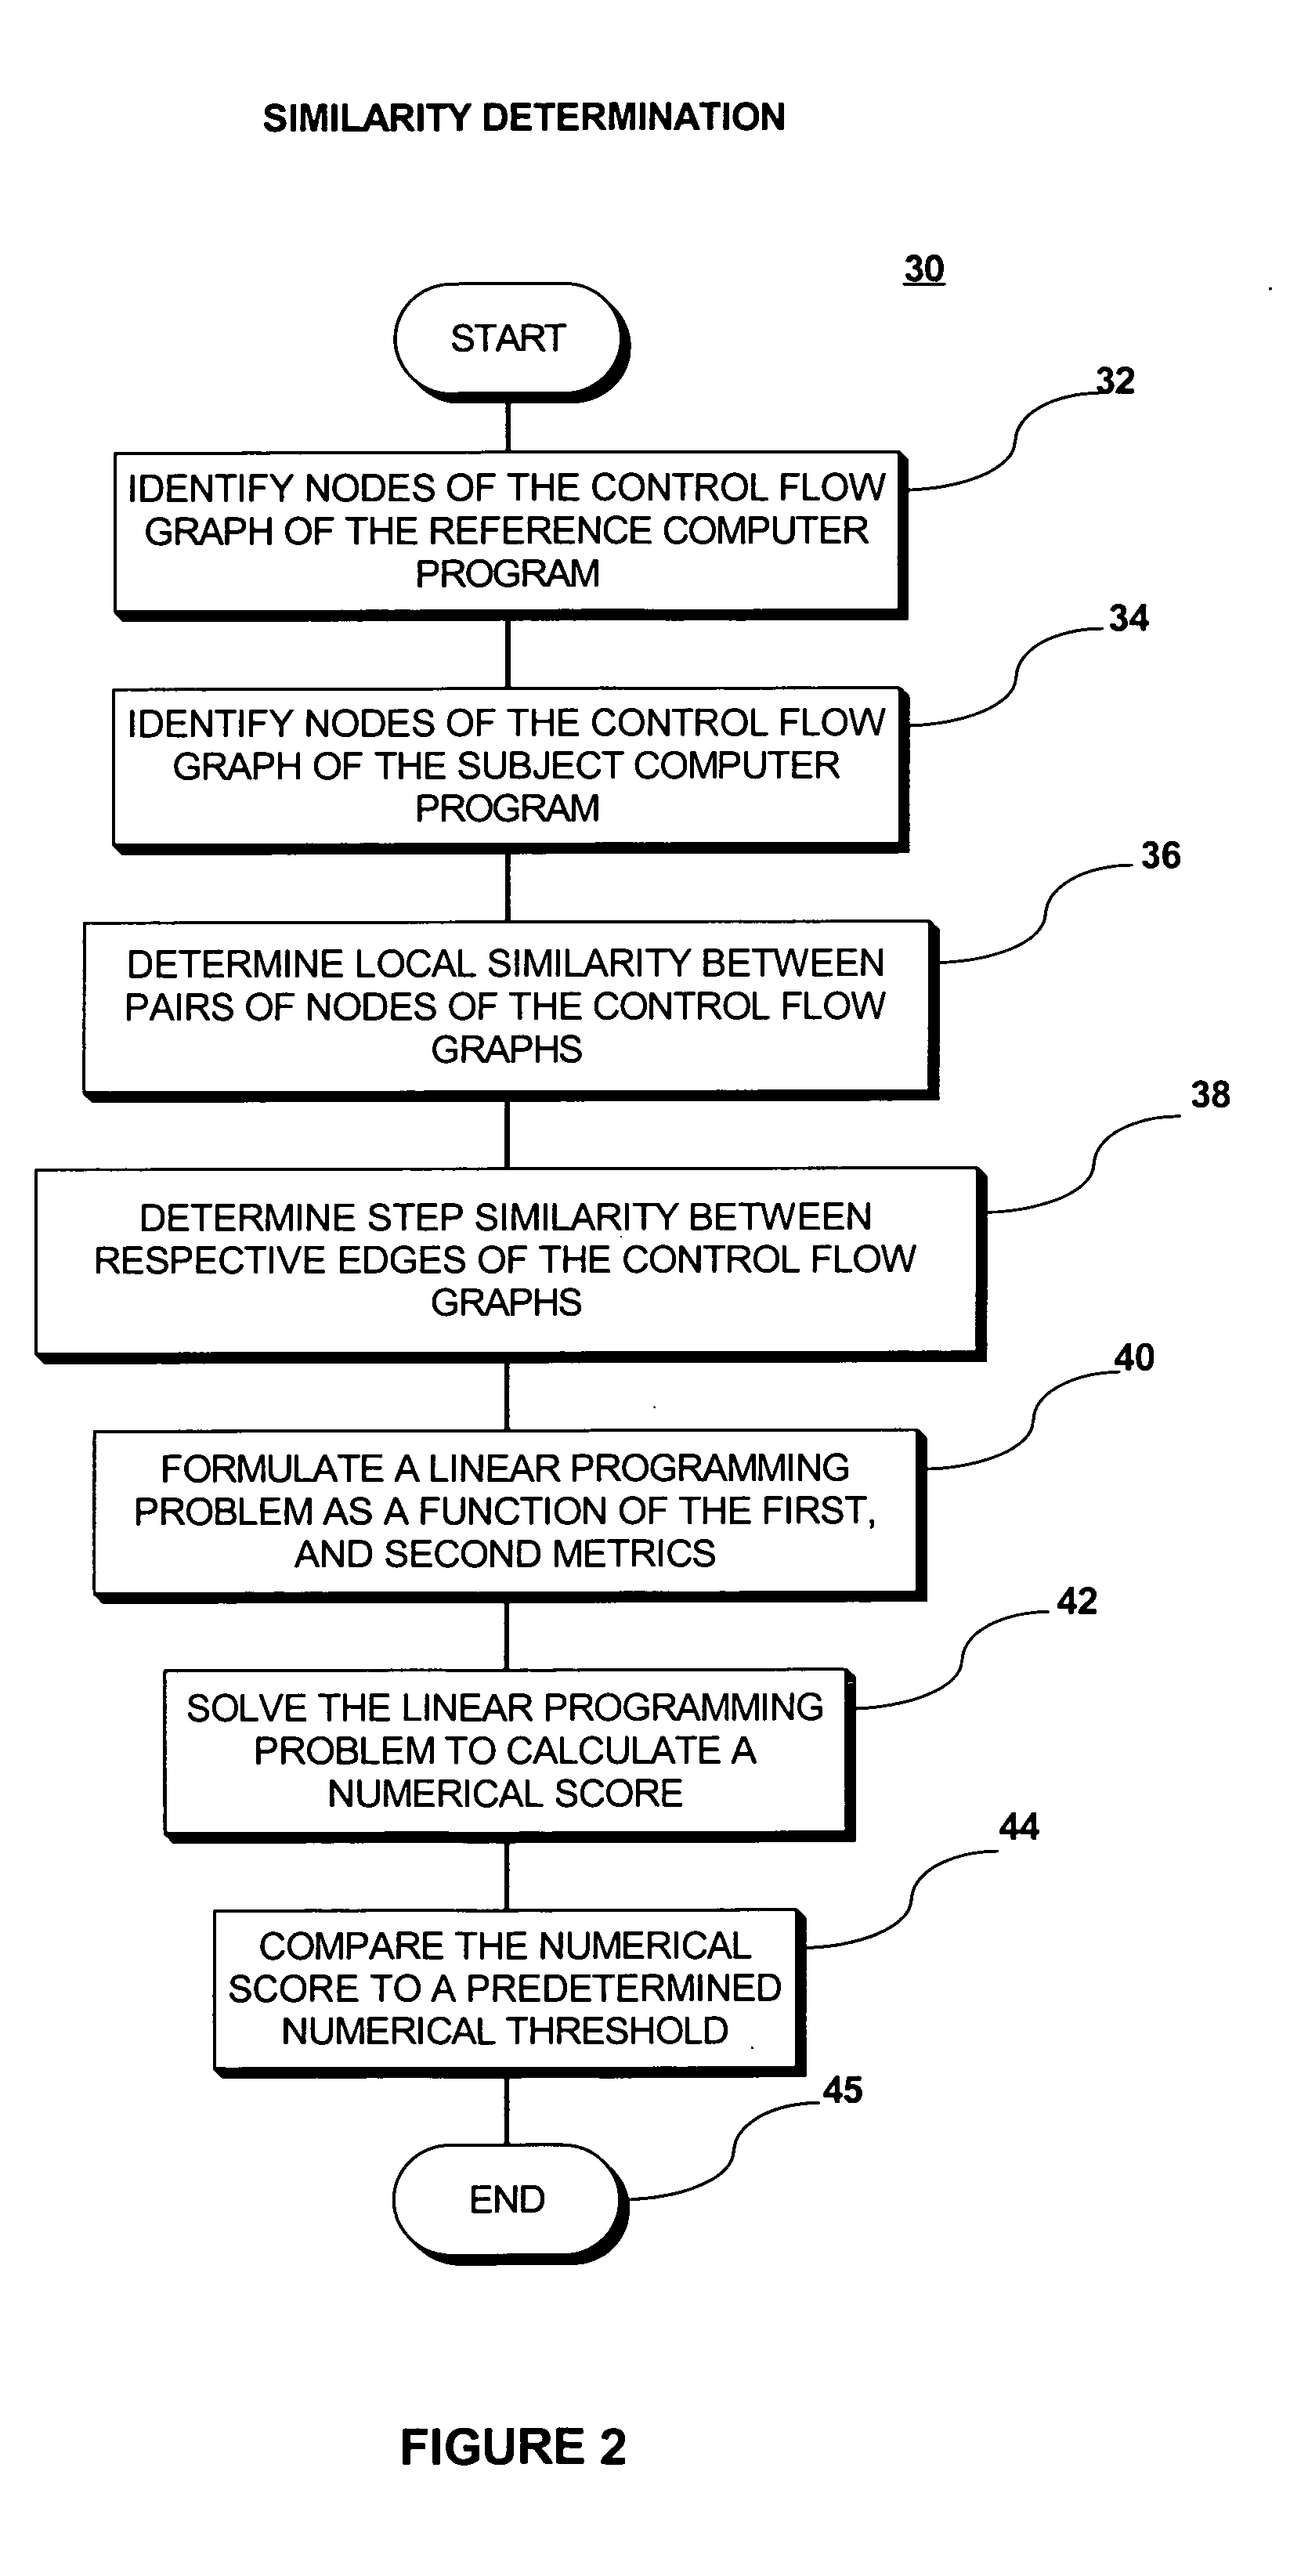 System and method for comparing similarity of computer programs